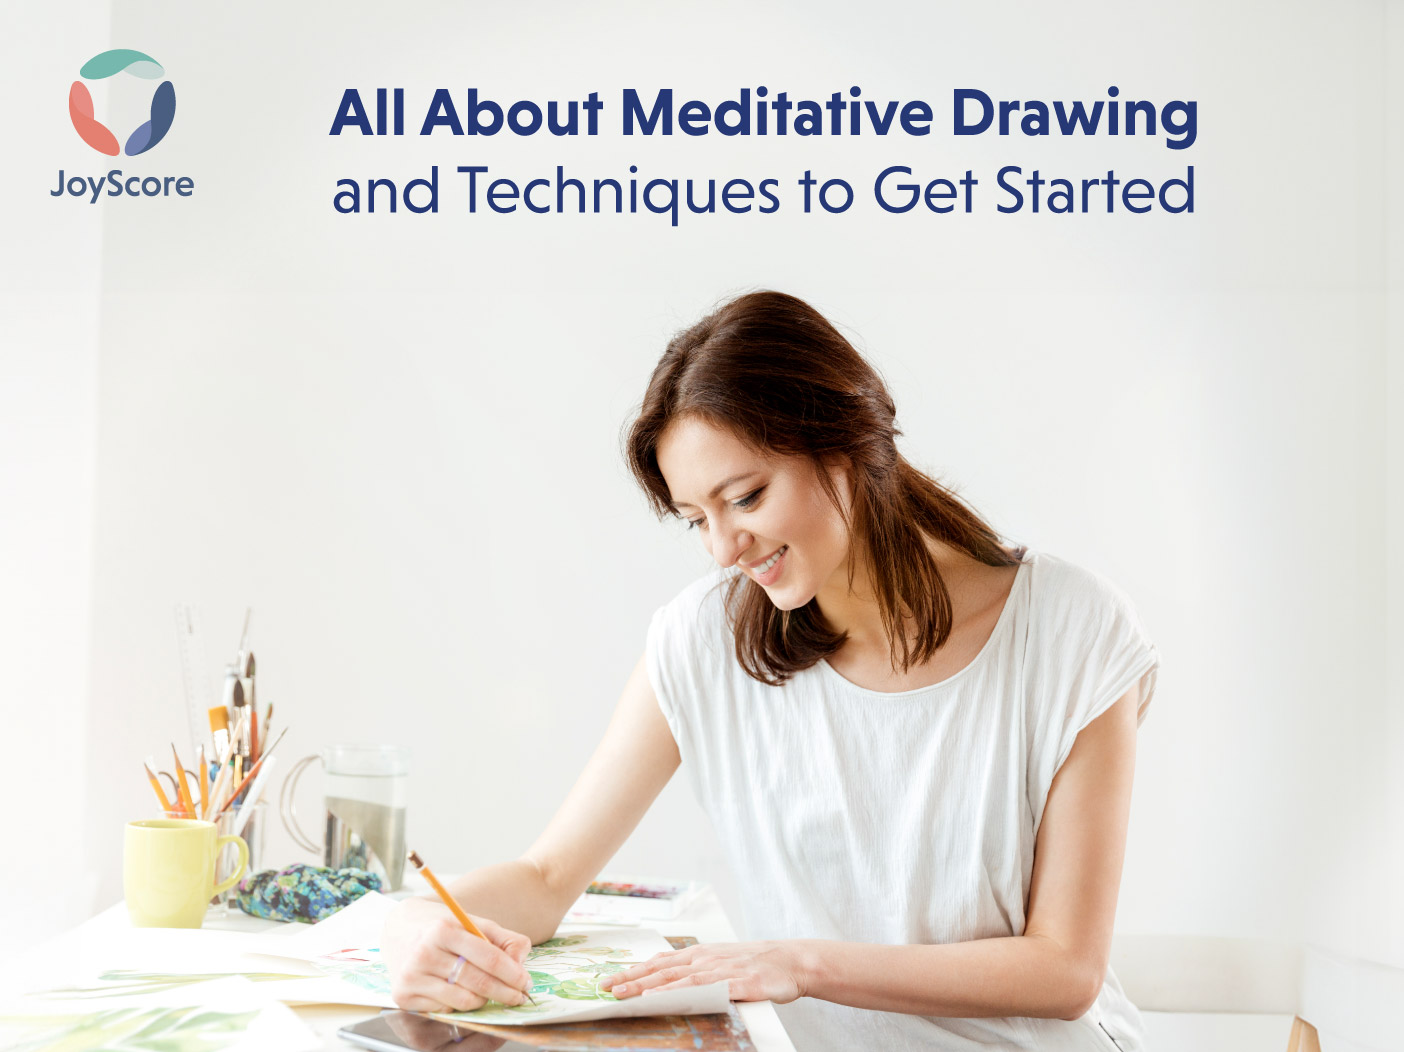 All About Meditative Drawing And Techniques To Get Started With Joyscore